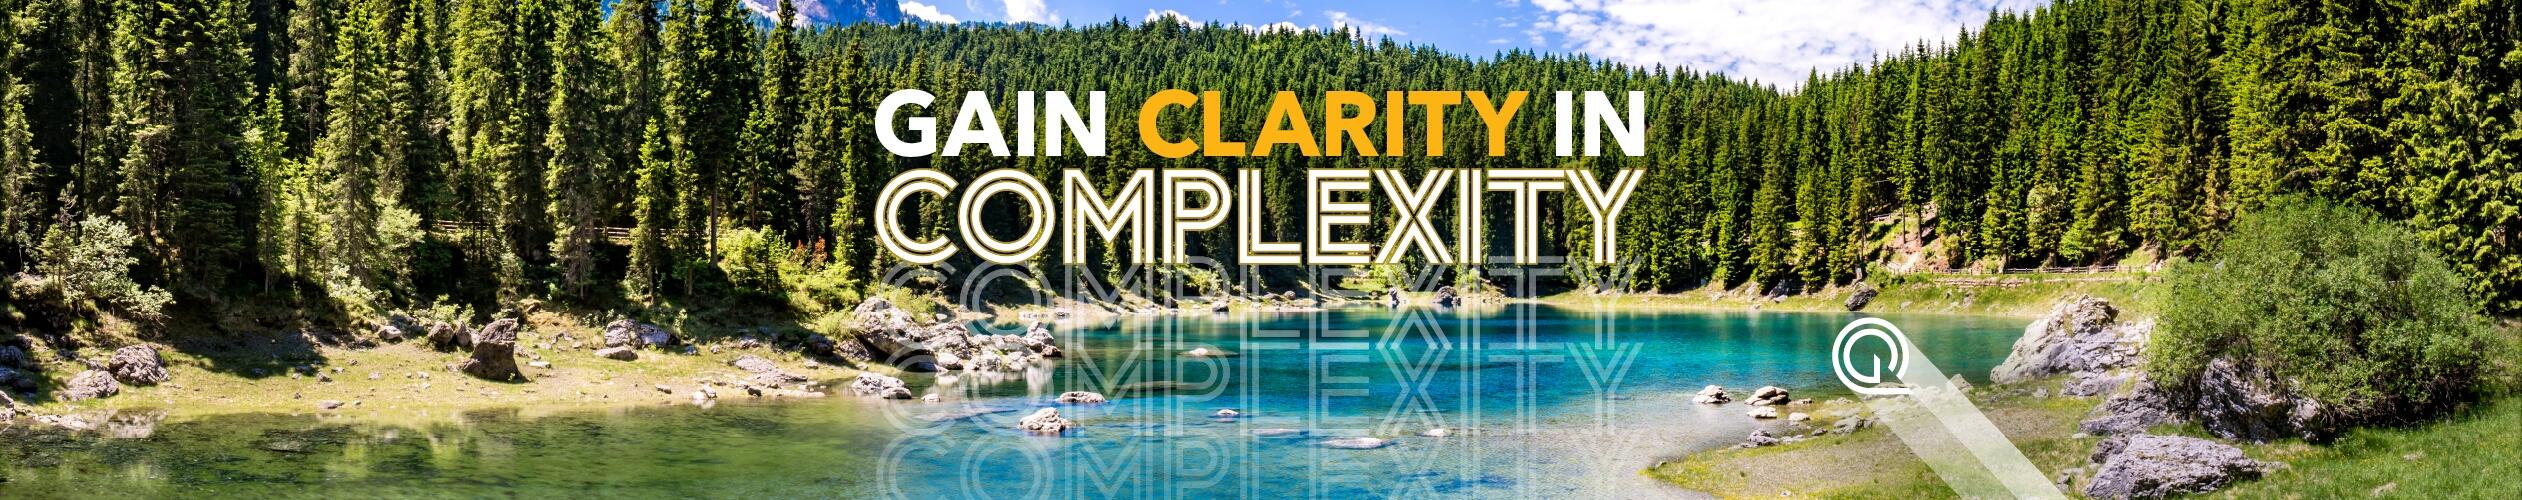 Gain Clarity in Complexity